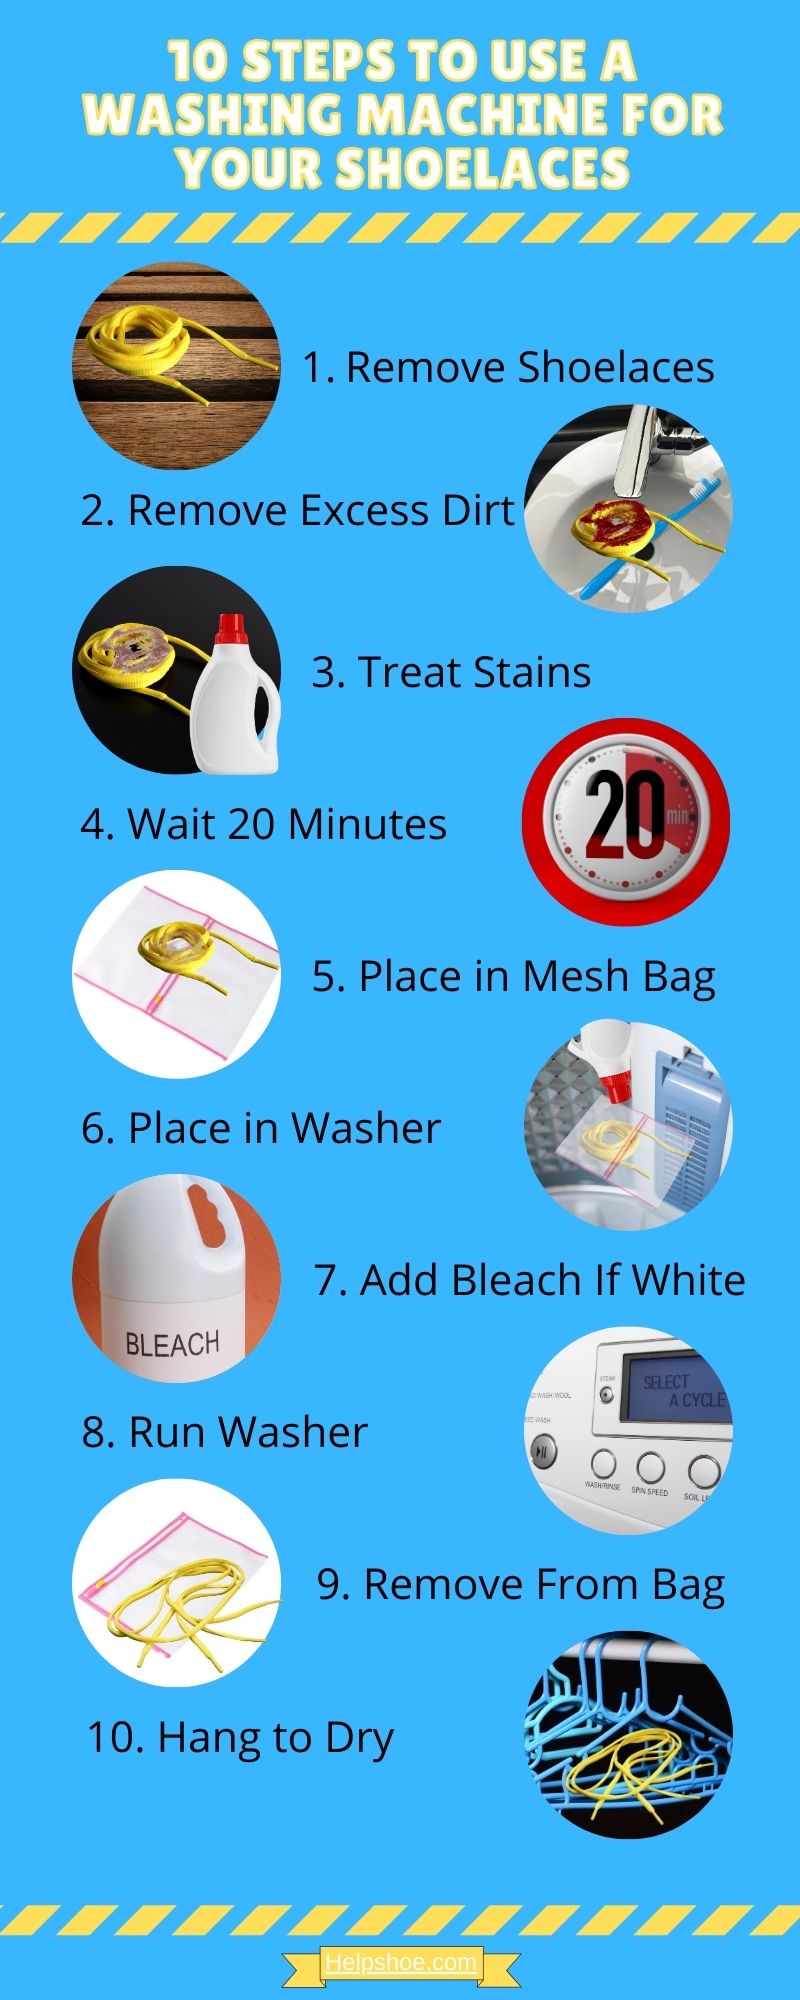 10 Steps to Use a Washing Machine for your Shoelaces